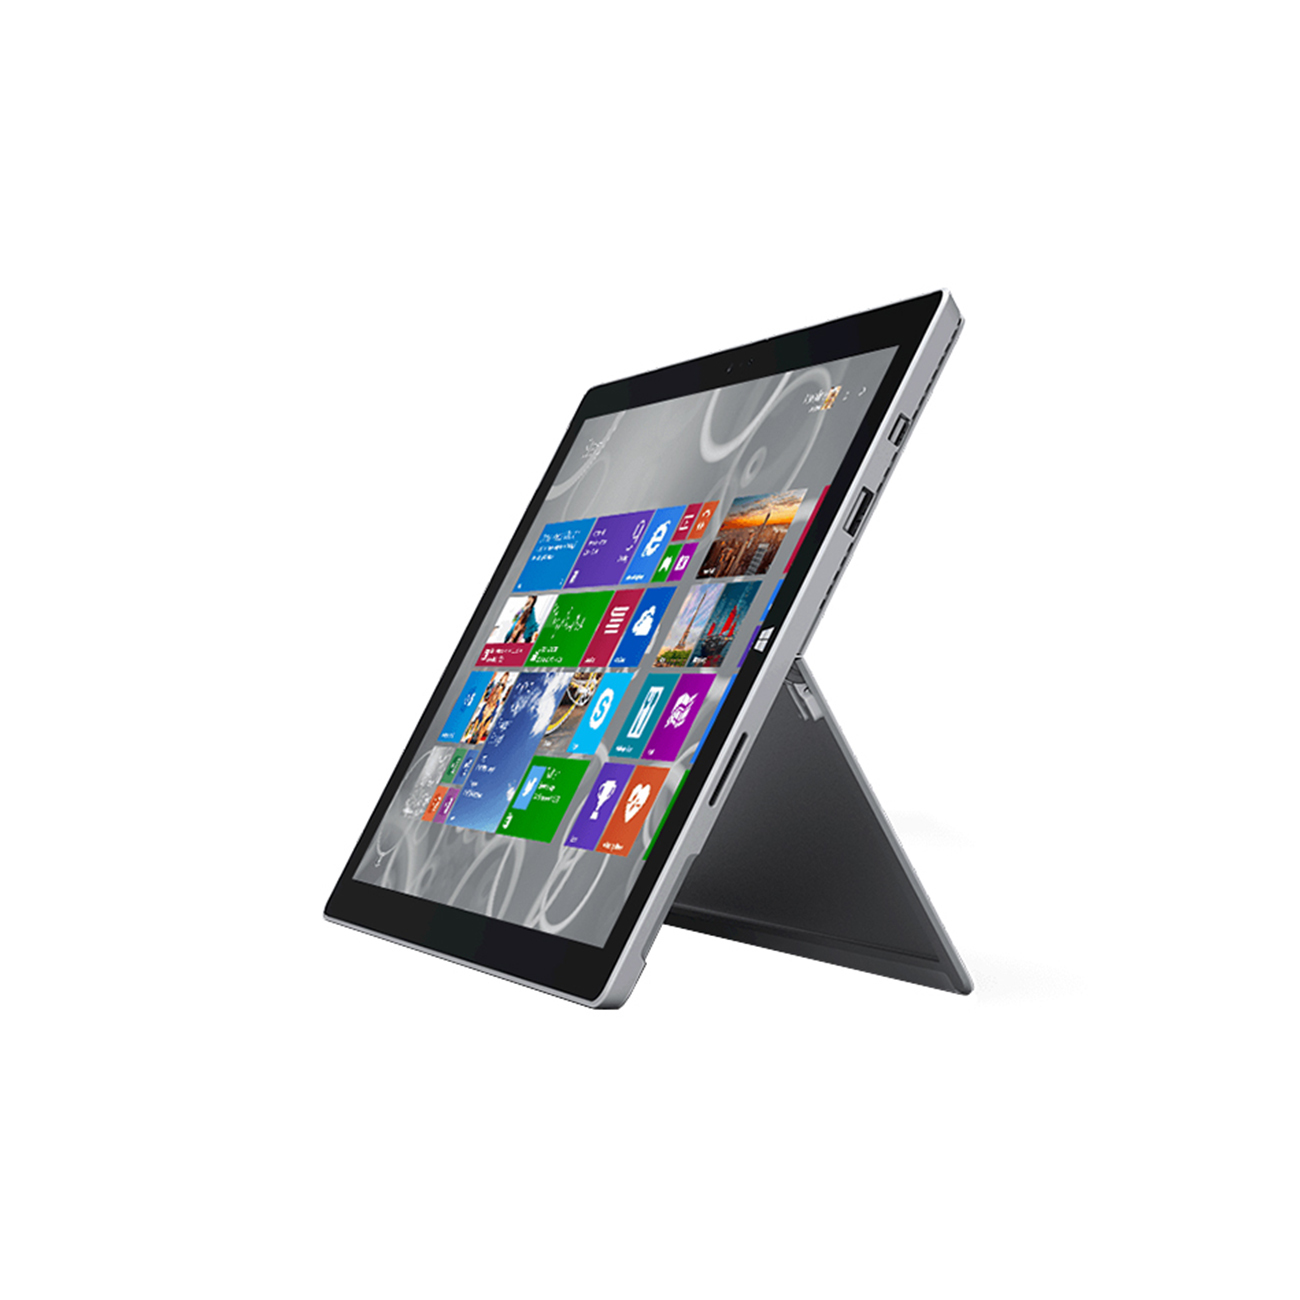 Microsoft  Surface Pro 3 - As New